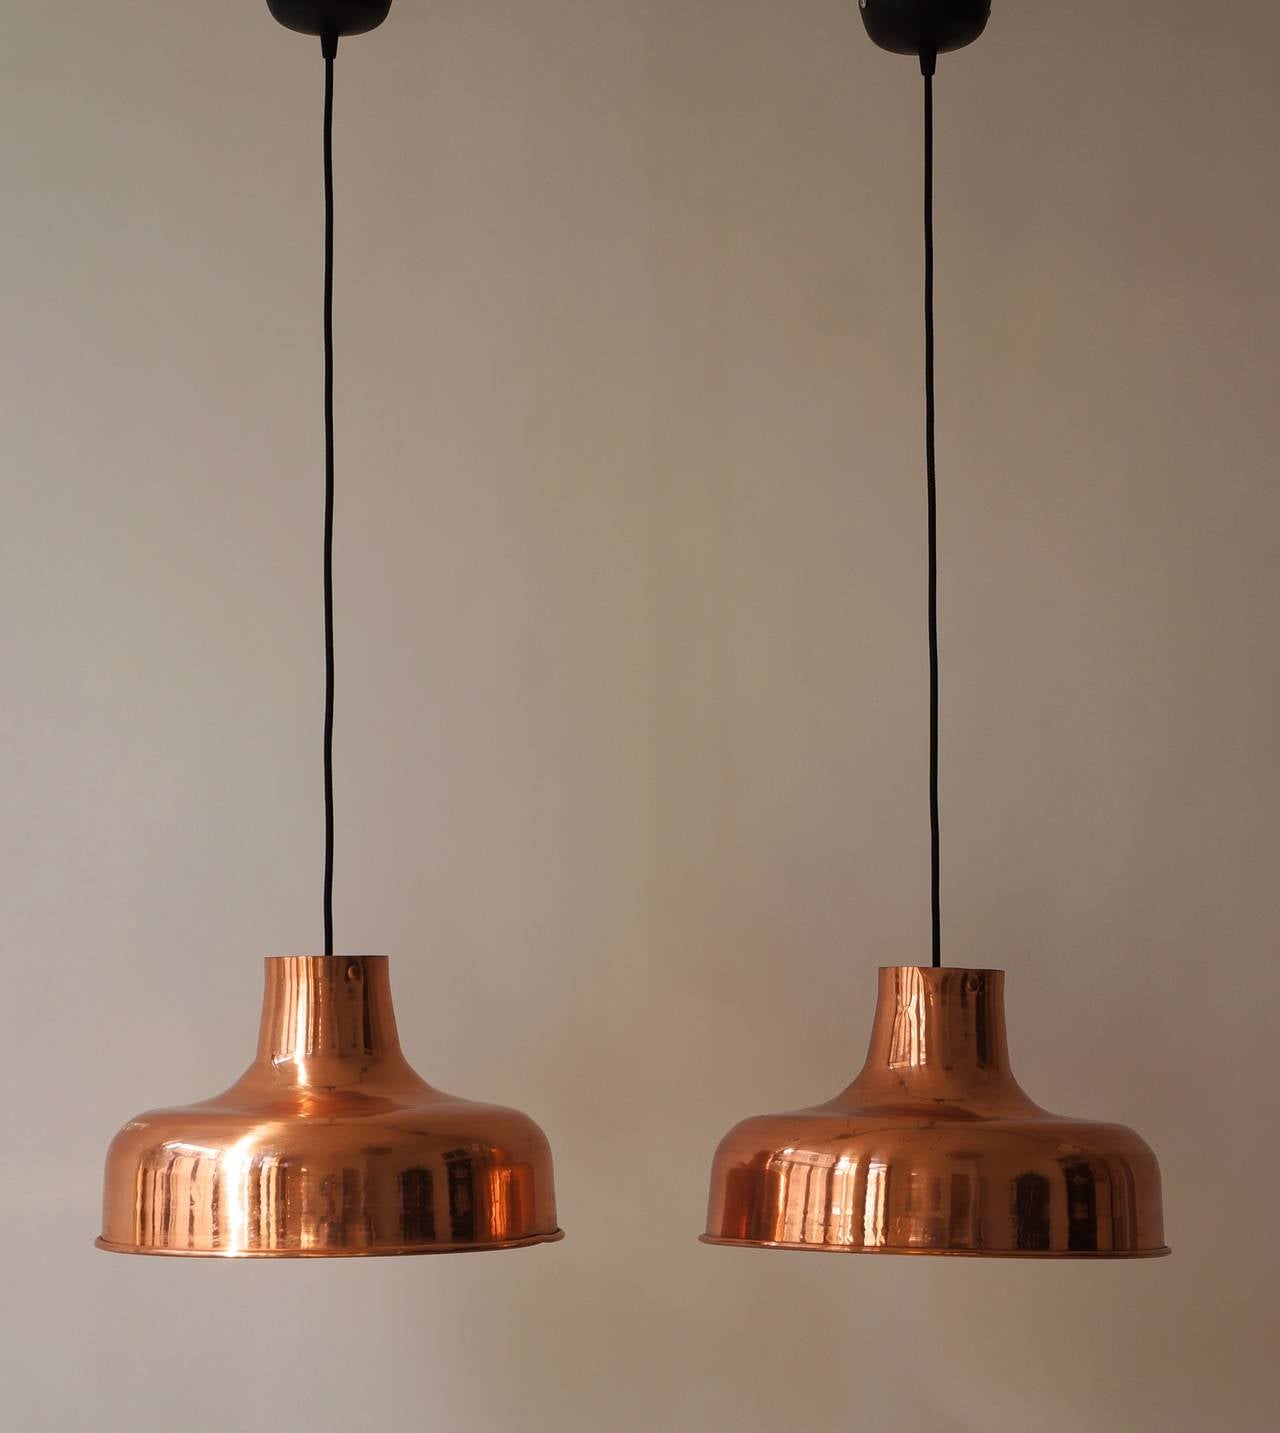 Vintage copper pendant lights with new electric wiring.